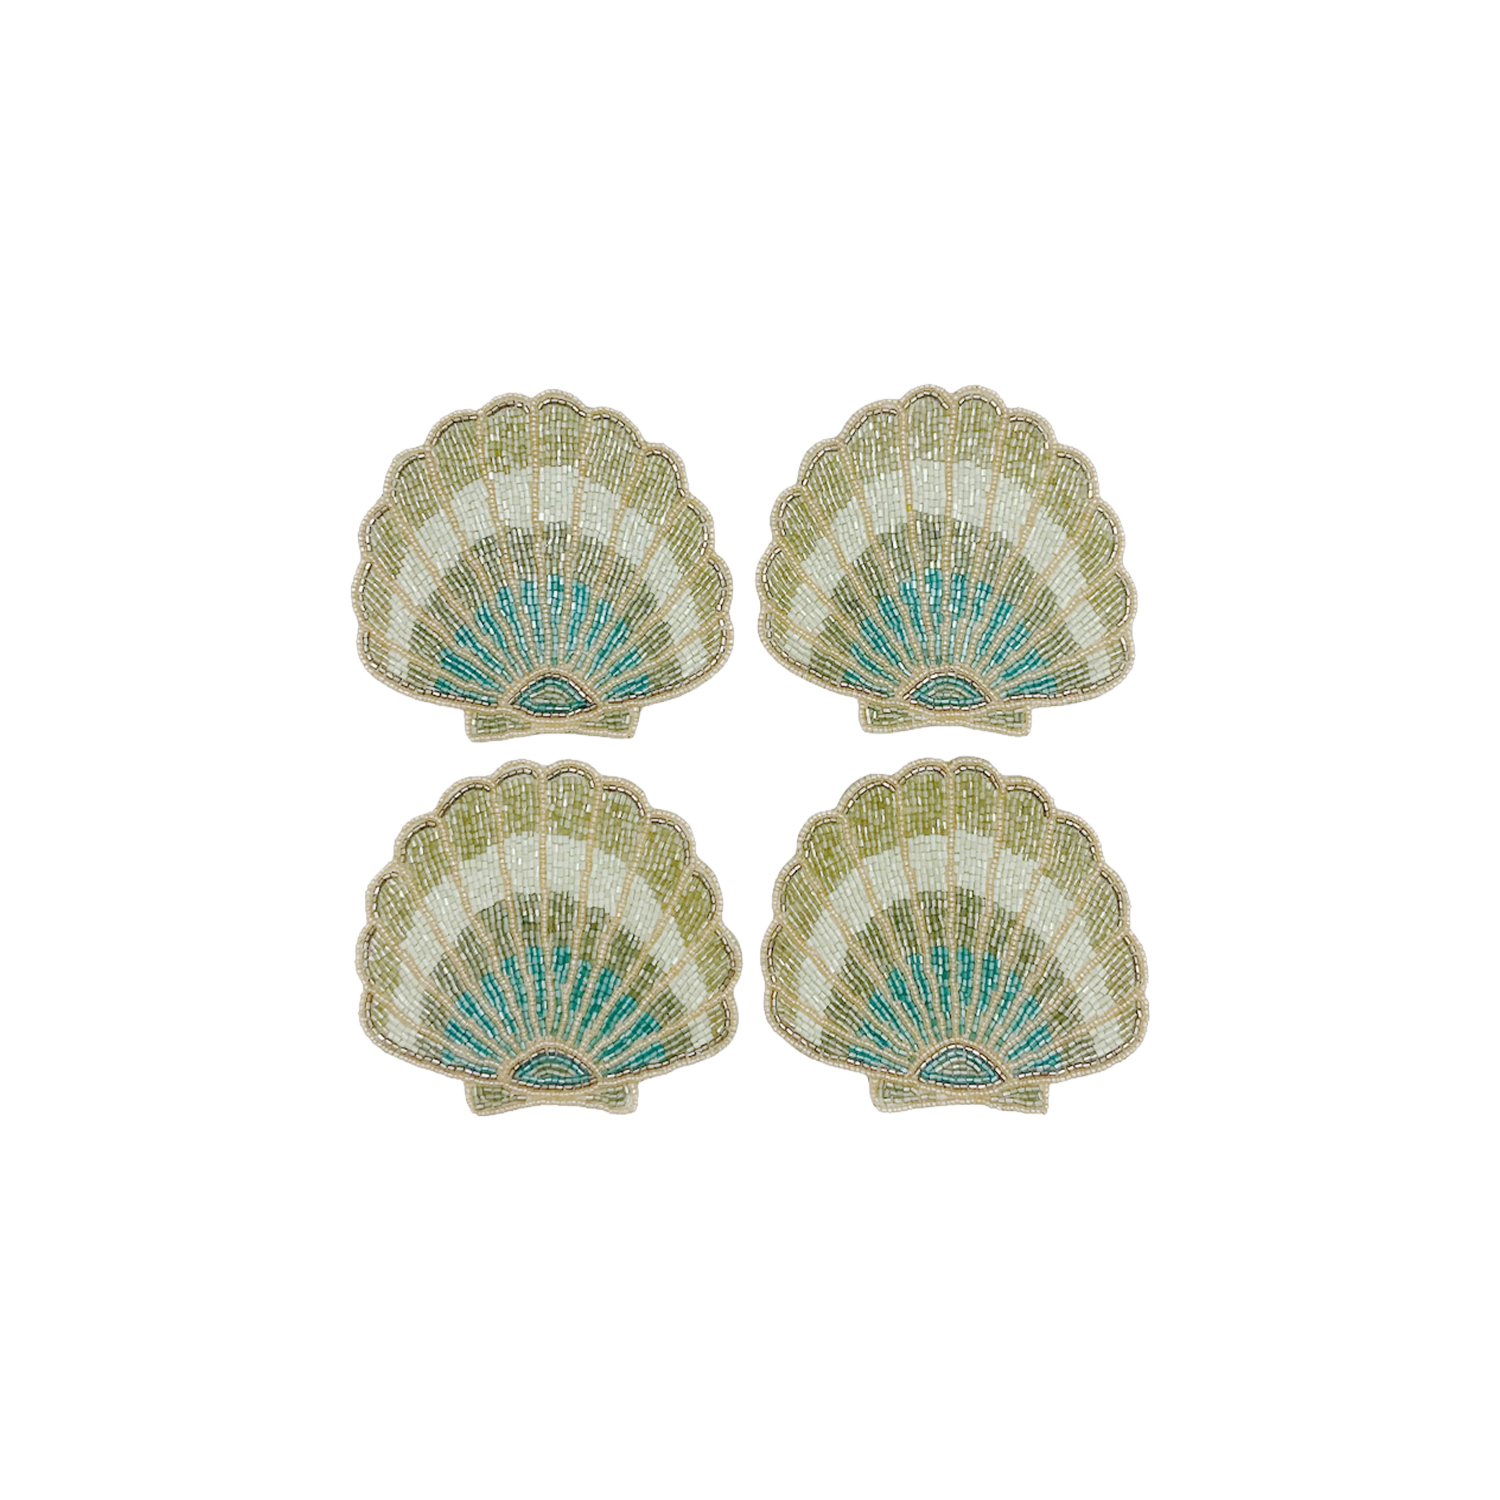 Embellished Scallop Shell Coaster S/4 10cm Gift